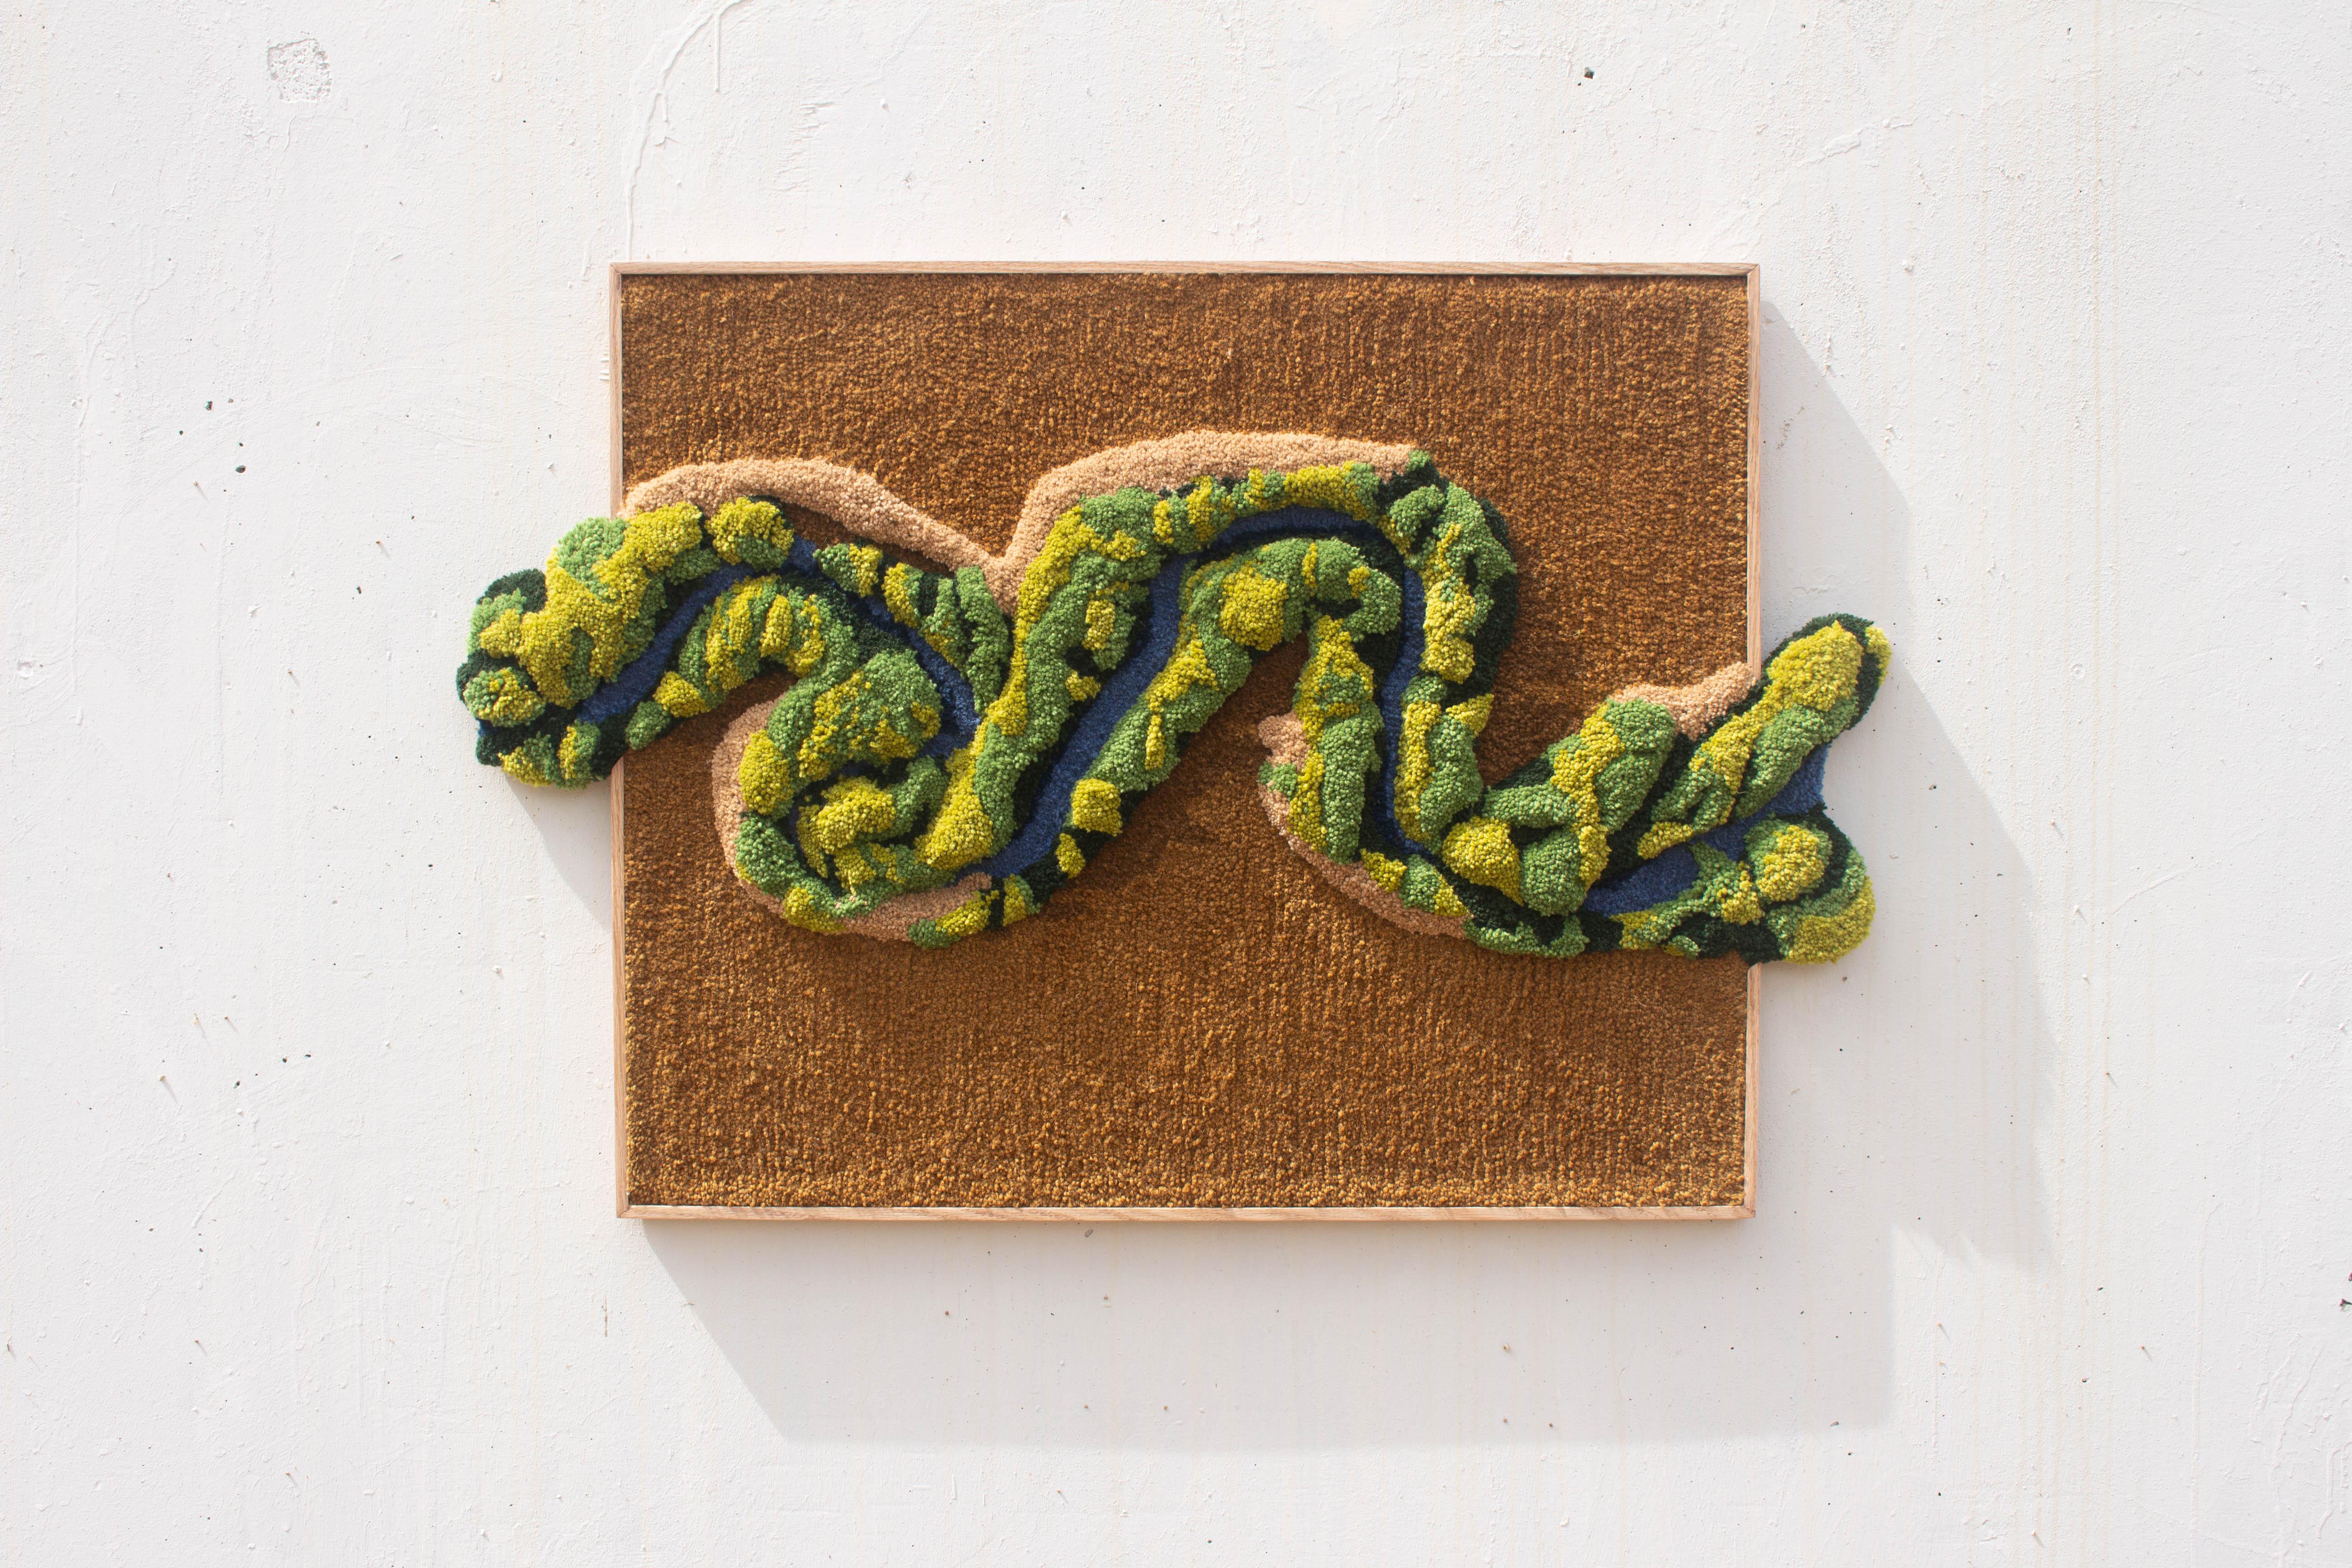 Inspired by nature, River Flow II is a one of a kind artwork. Explores the importance of water in life. Handmade with 100% Portuguese wool yarn, using tufting gun and carving techniques. The oak frame is designed and produced by the studio.

Estudio